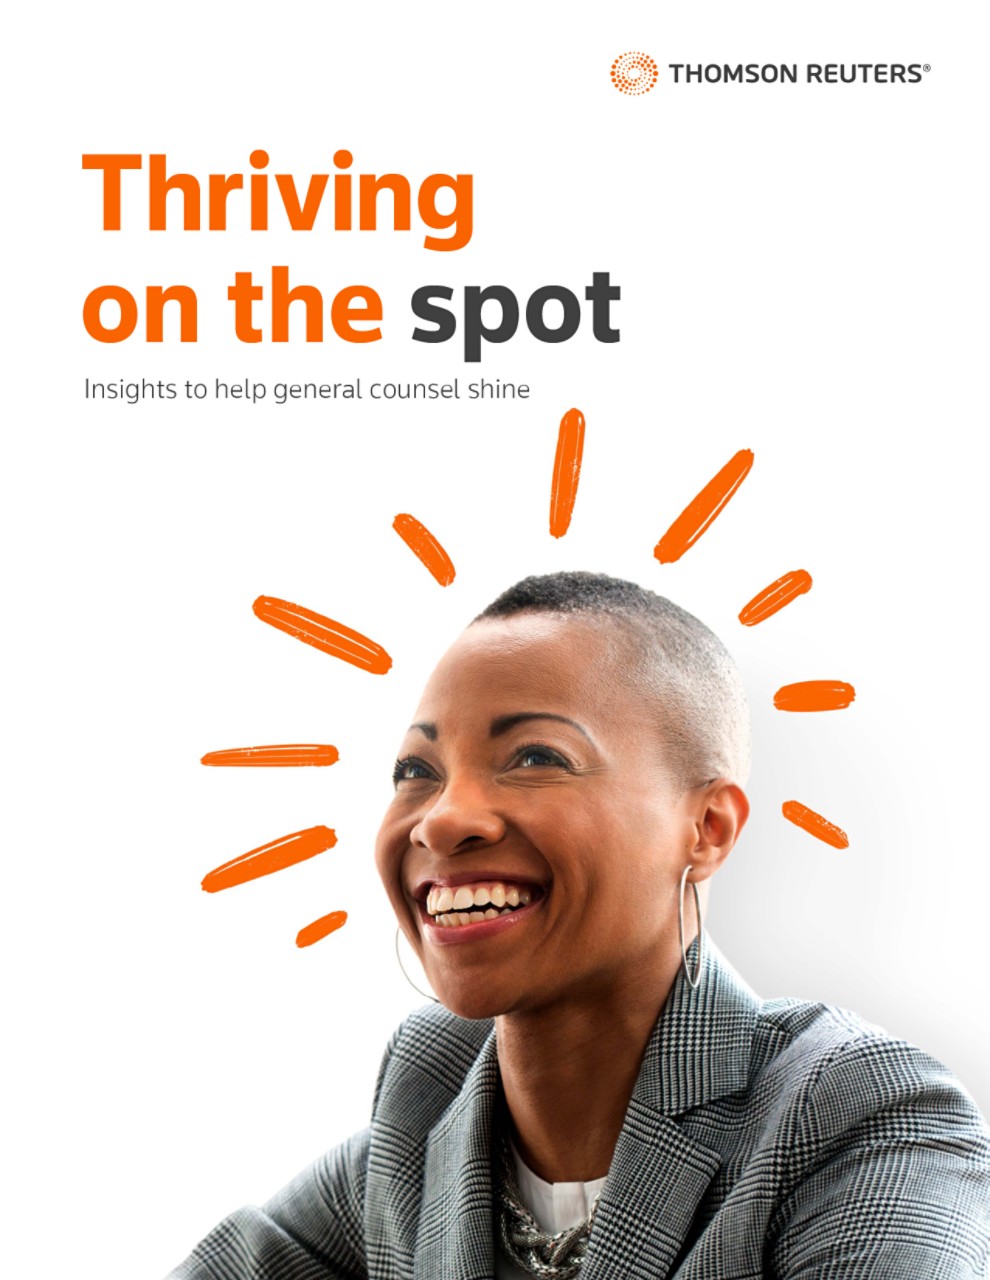 Preview image of white paper cover with title - Thriving on the spot, insights to help general counsel shine